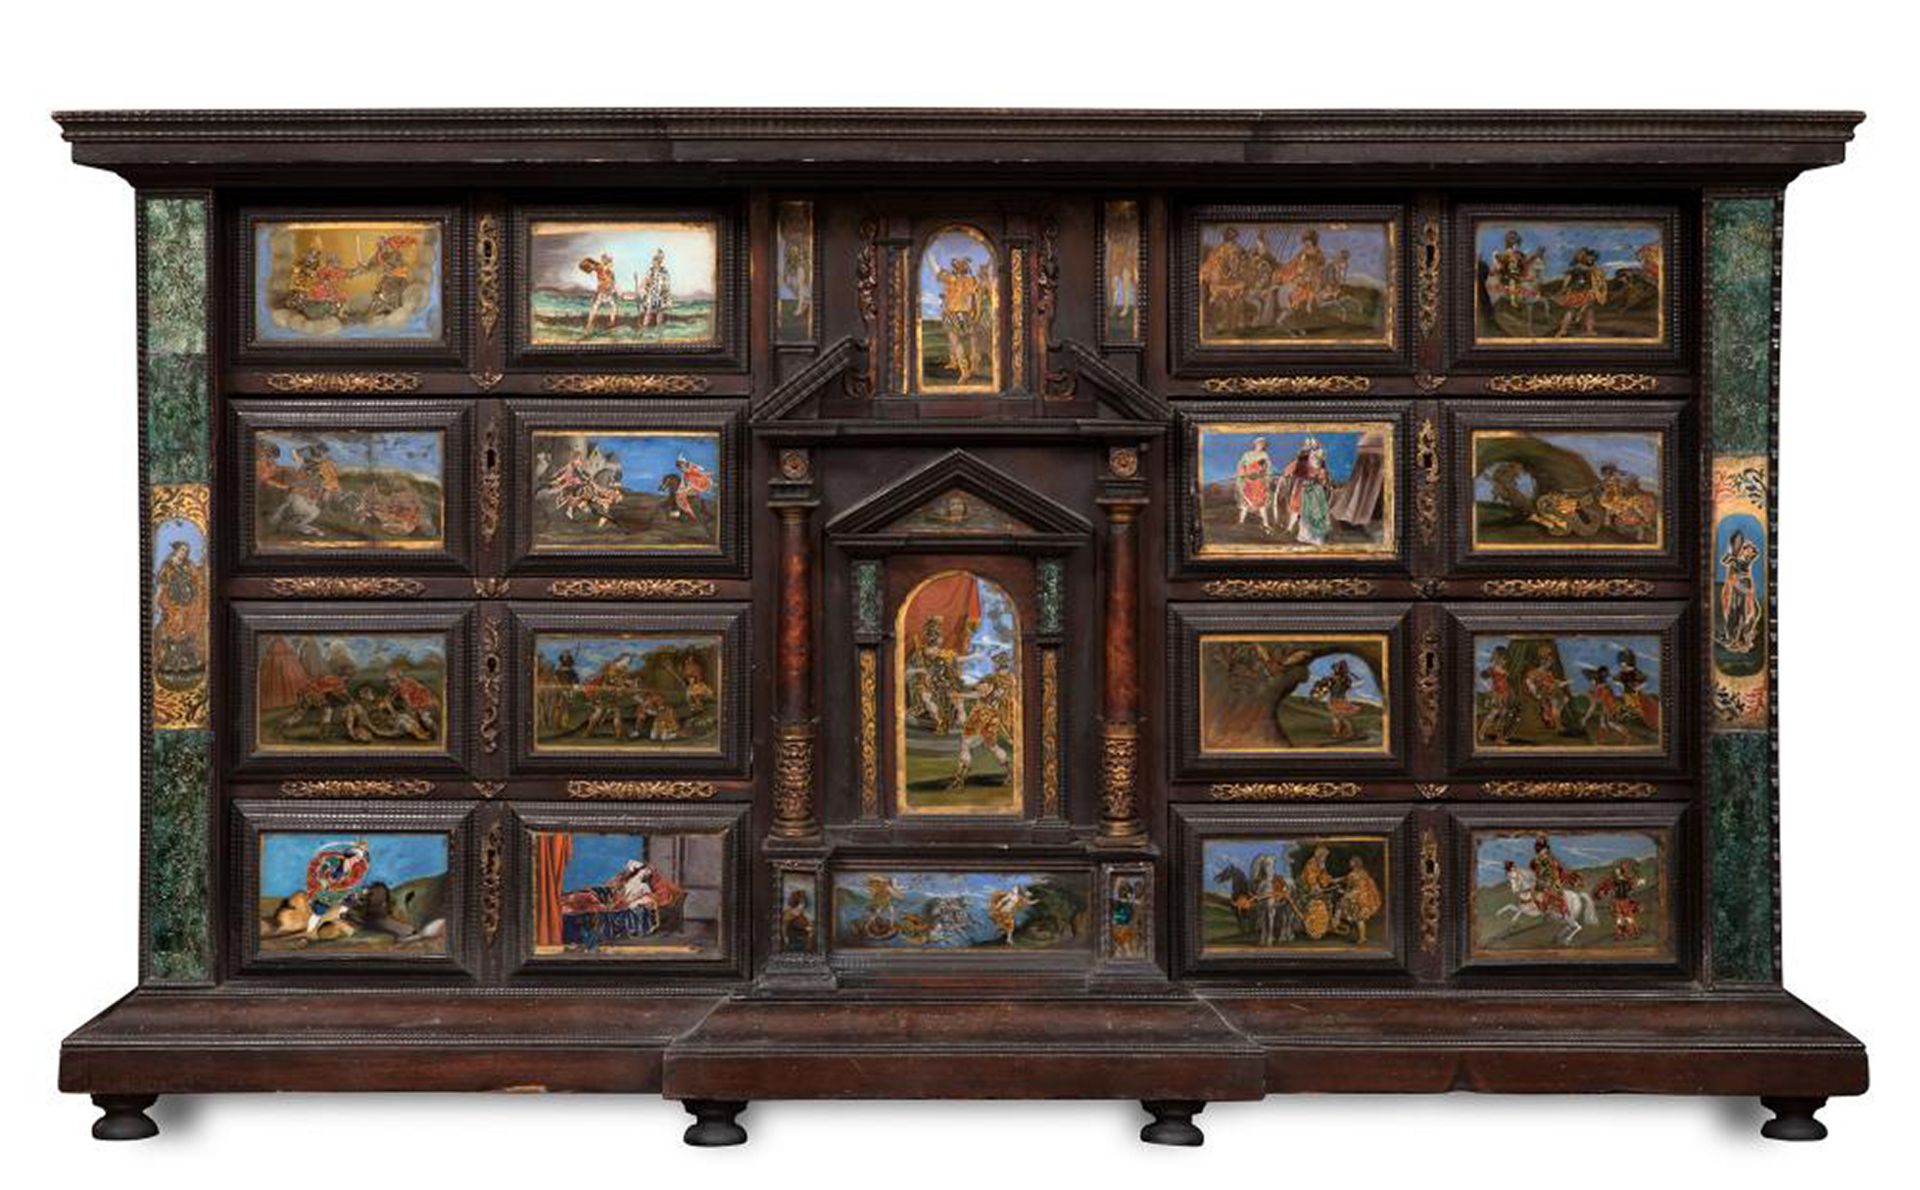 Important Neapolitan Cabinet in rosewood marquetry, tortoiseshell and painted glass, Italian school 